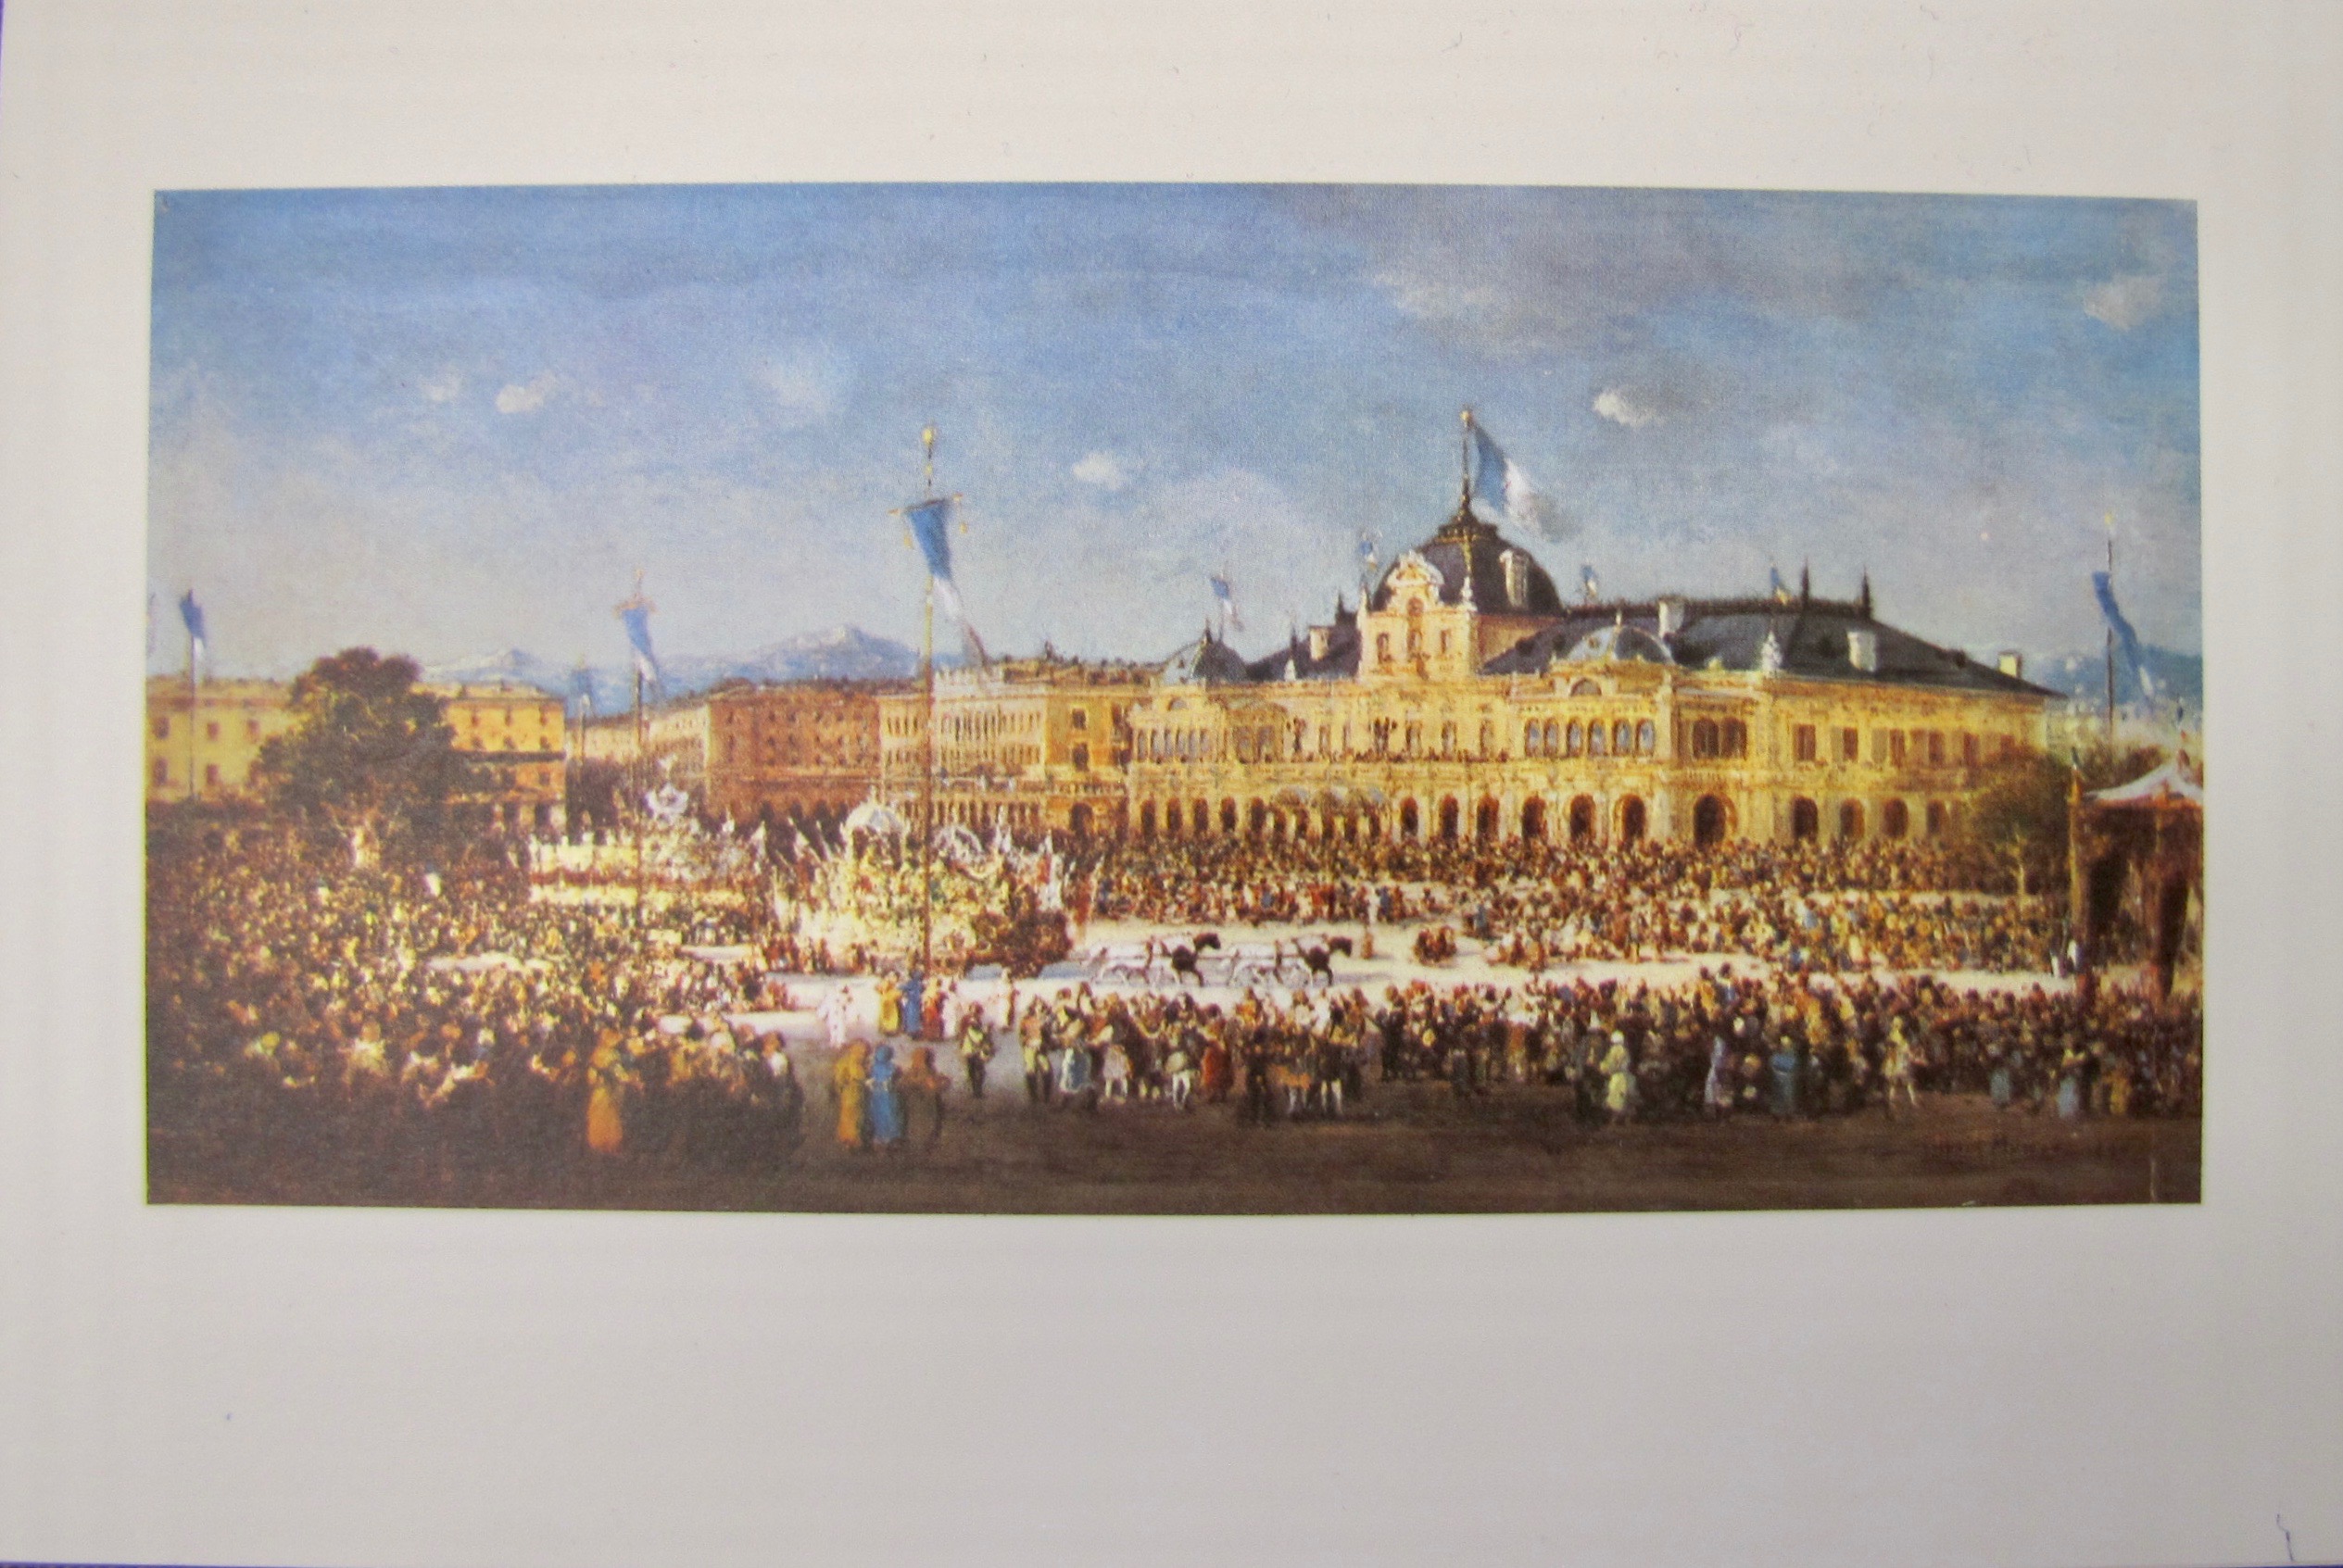 Blank Note Cards: Gilbert Munger, "Carnival at Nice", 1890. Set of 5